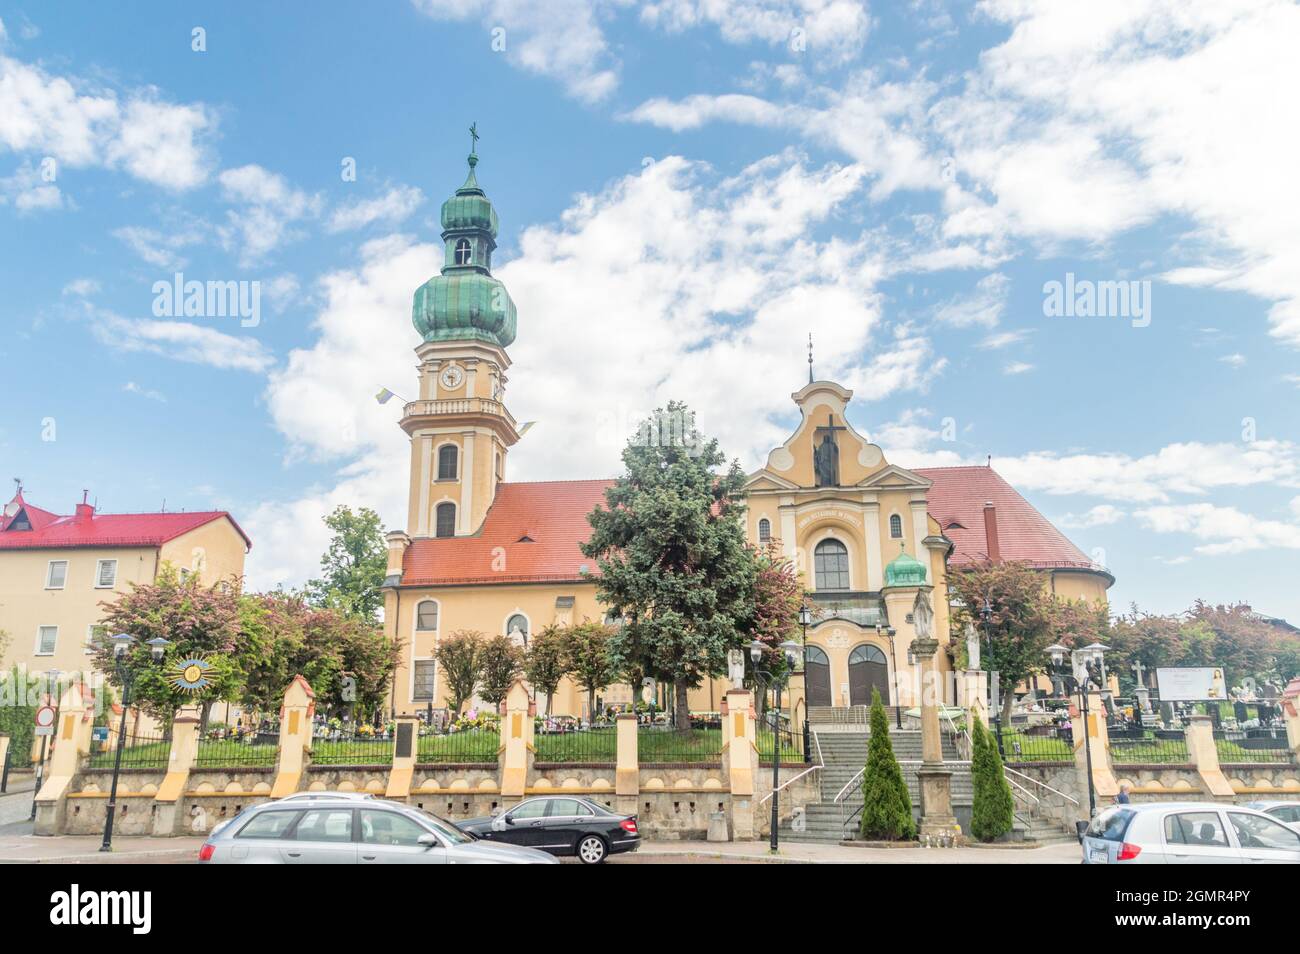 Tychy, Poland - June 5, 2021: St. Mary Magdalene church in Tychy. Stock Photo